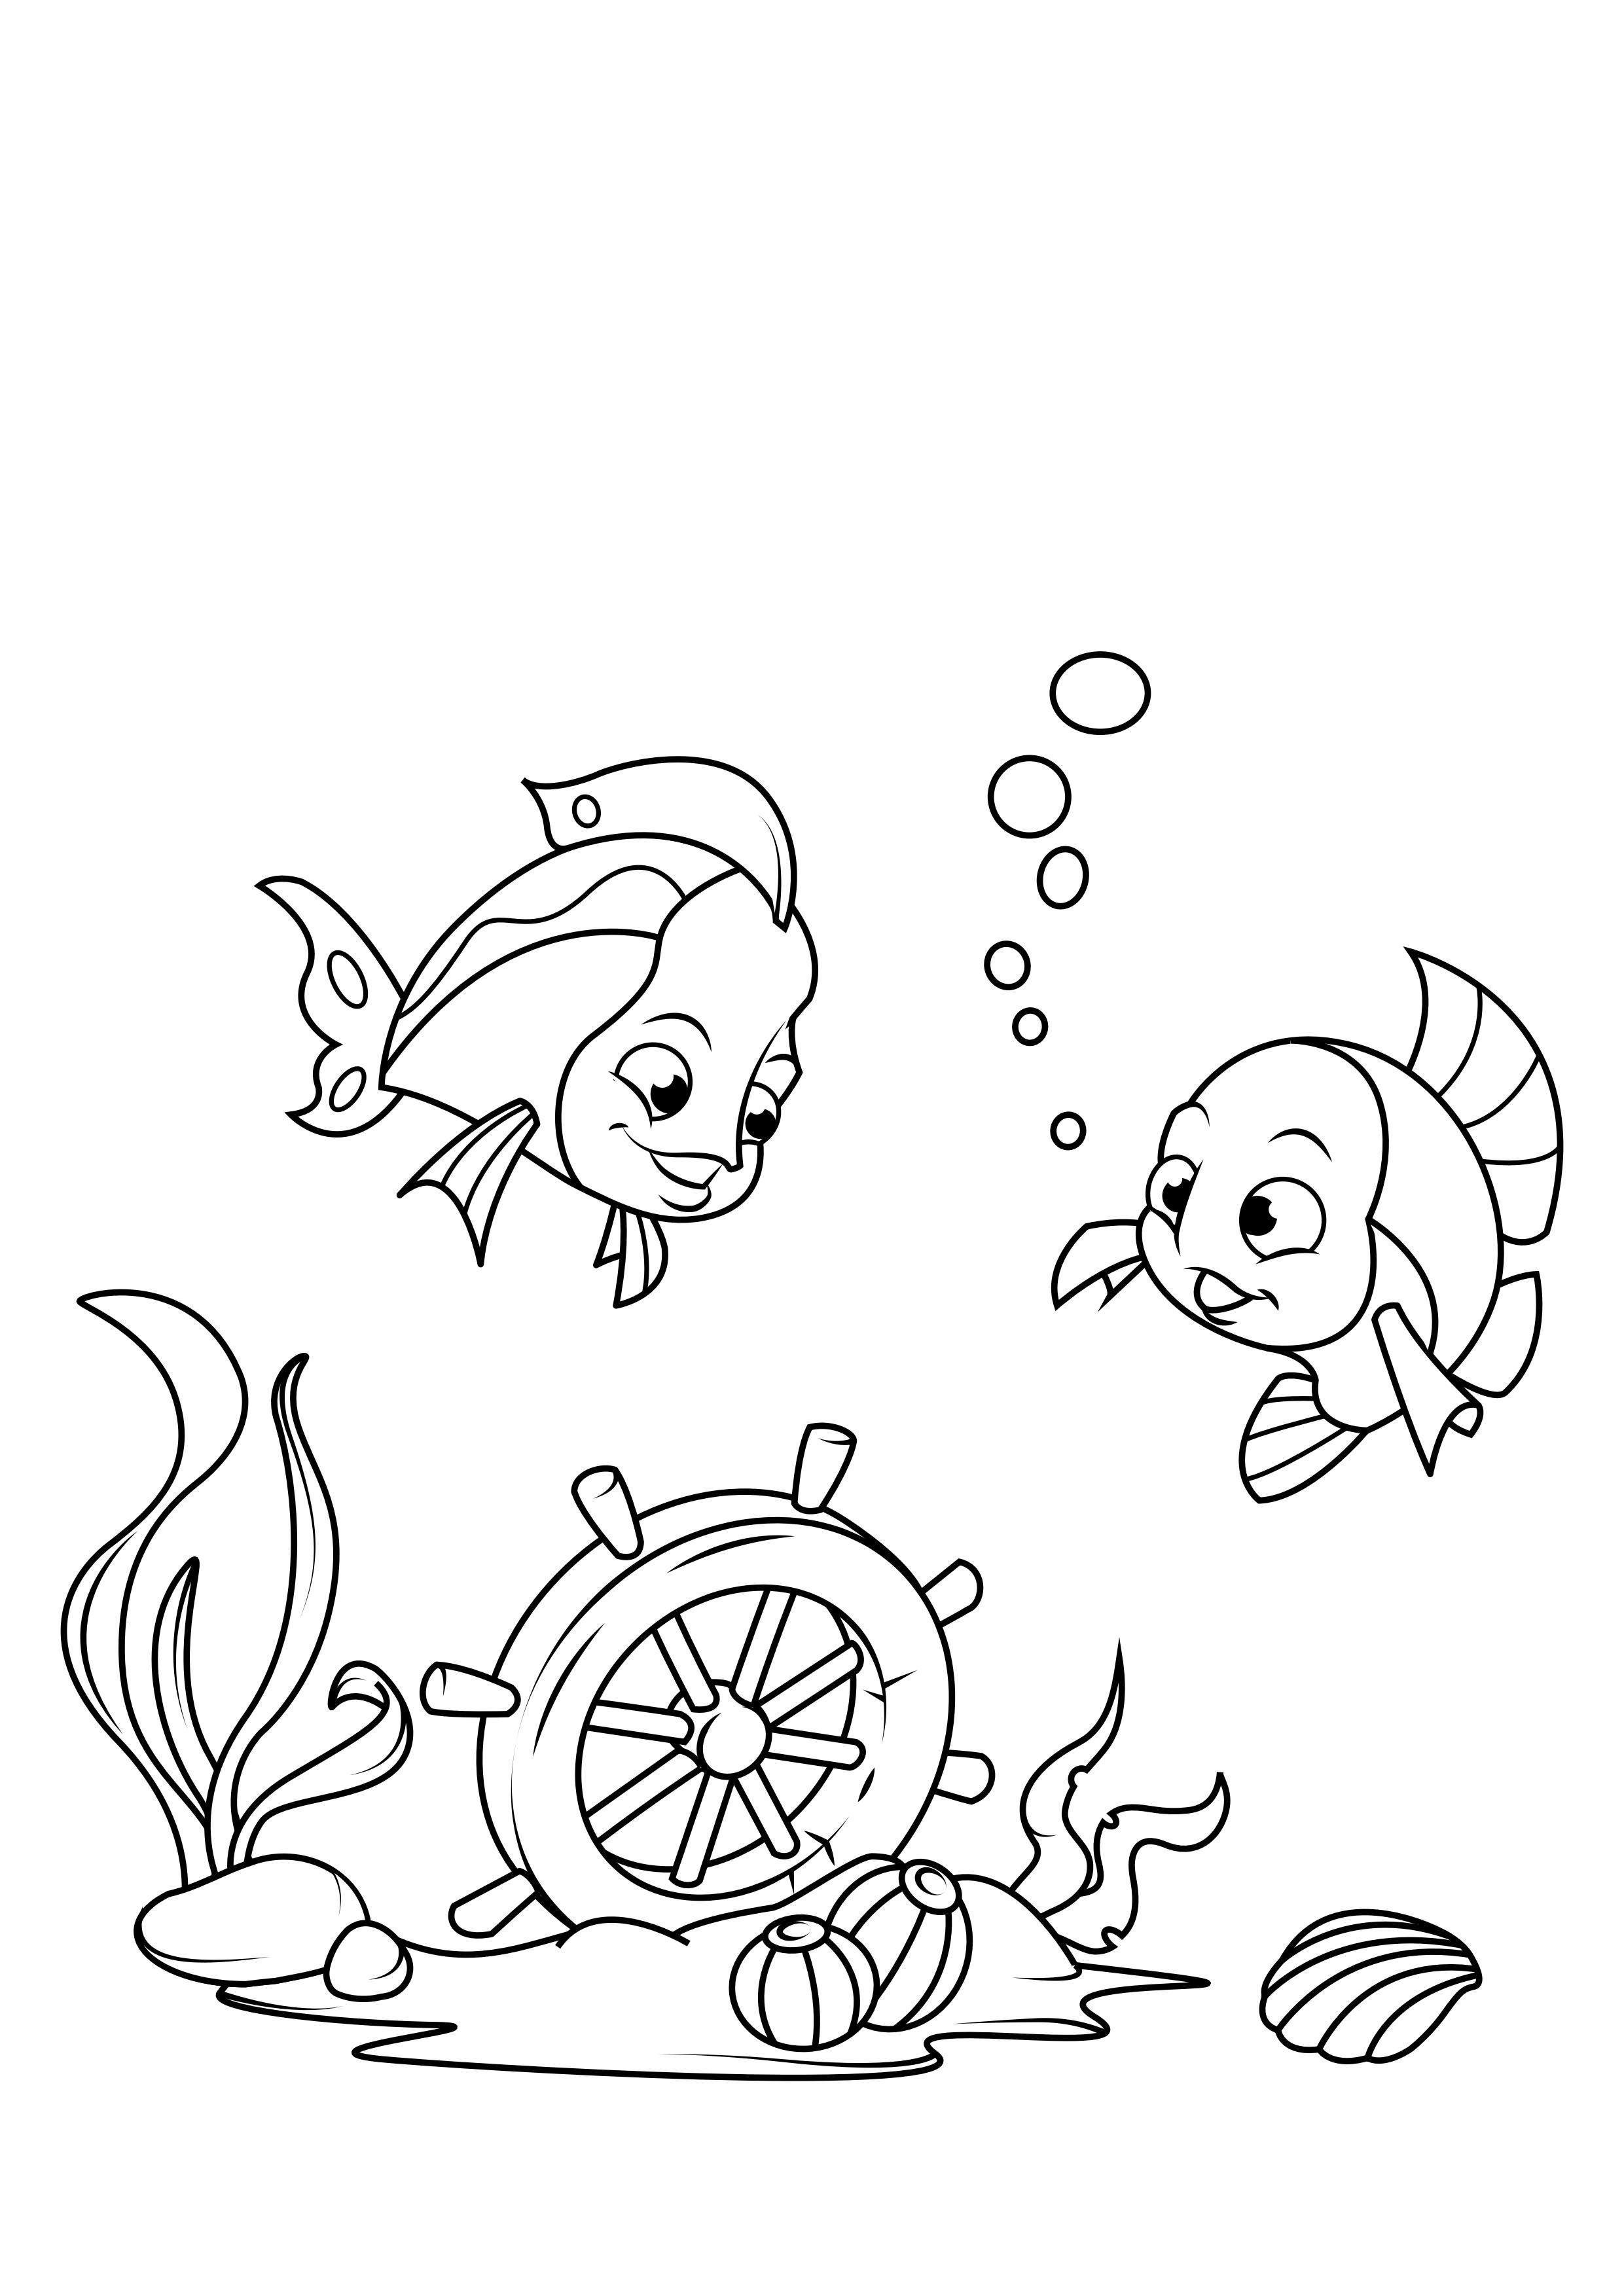 Coloring page fish and steering wheel